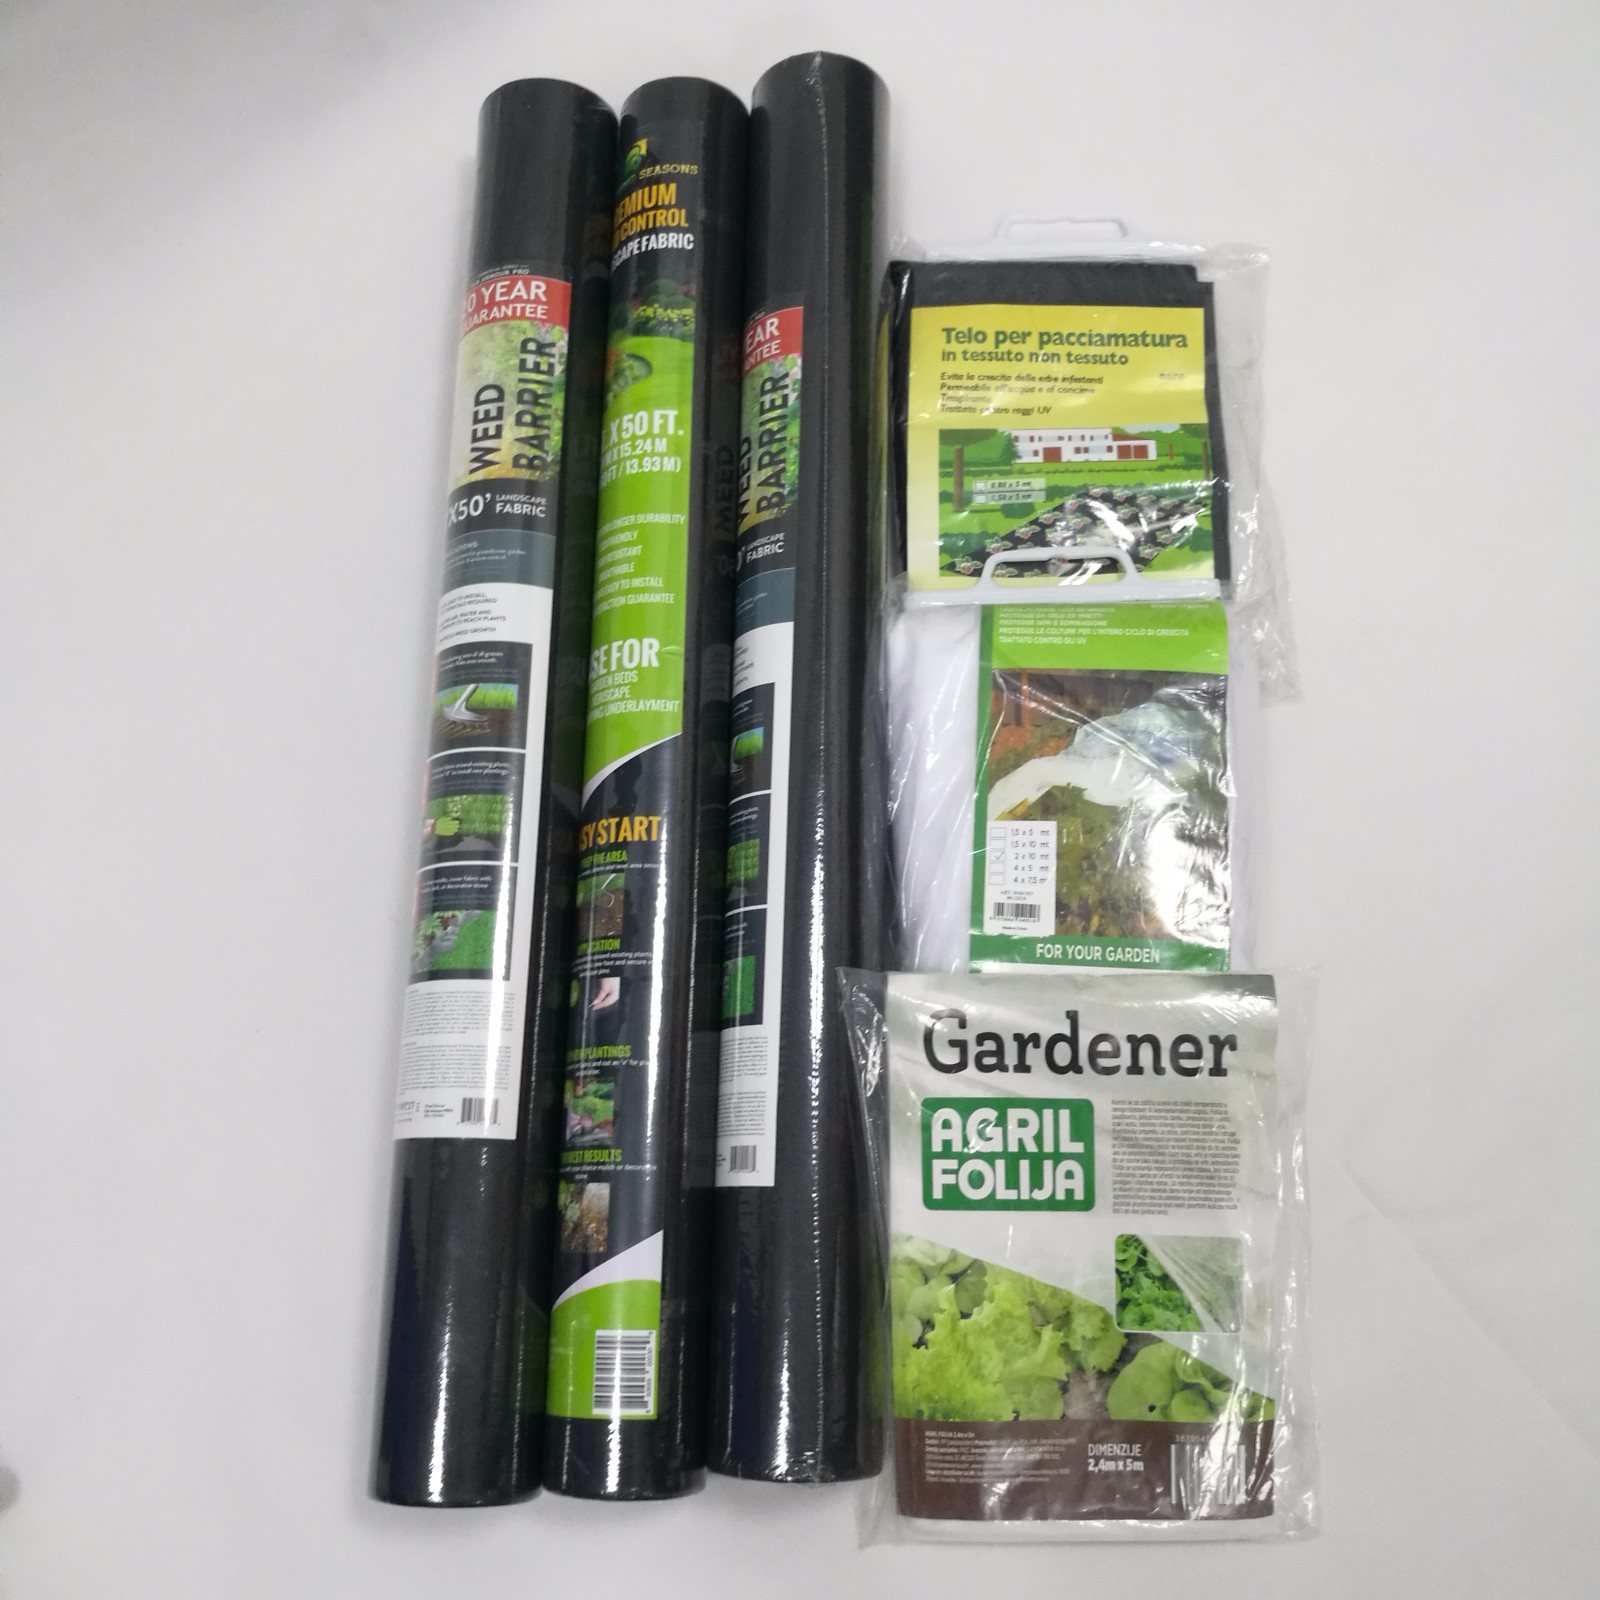 Agriculture Accessories For Garden Weed Control Manufacturers, Agriculture Accessories For Garden Weed Control Factory, Supply Agriculture Accessories For Garden Weed Control